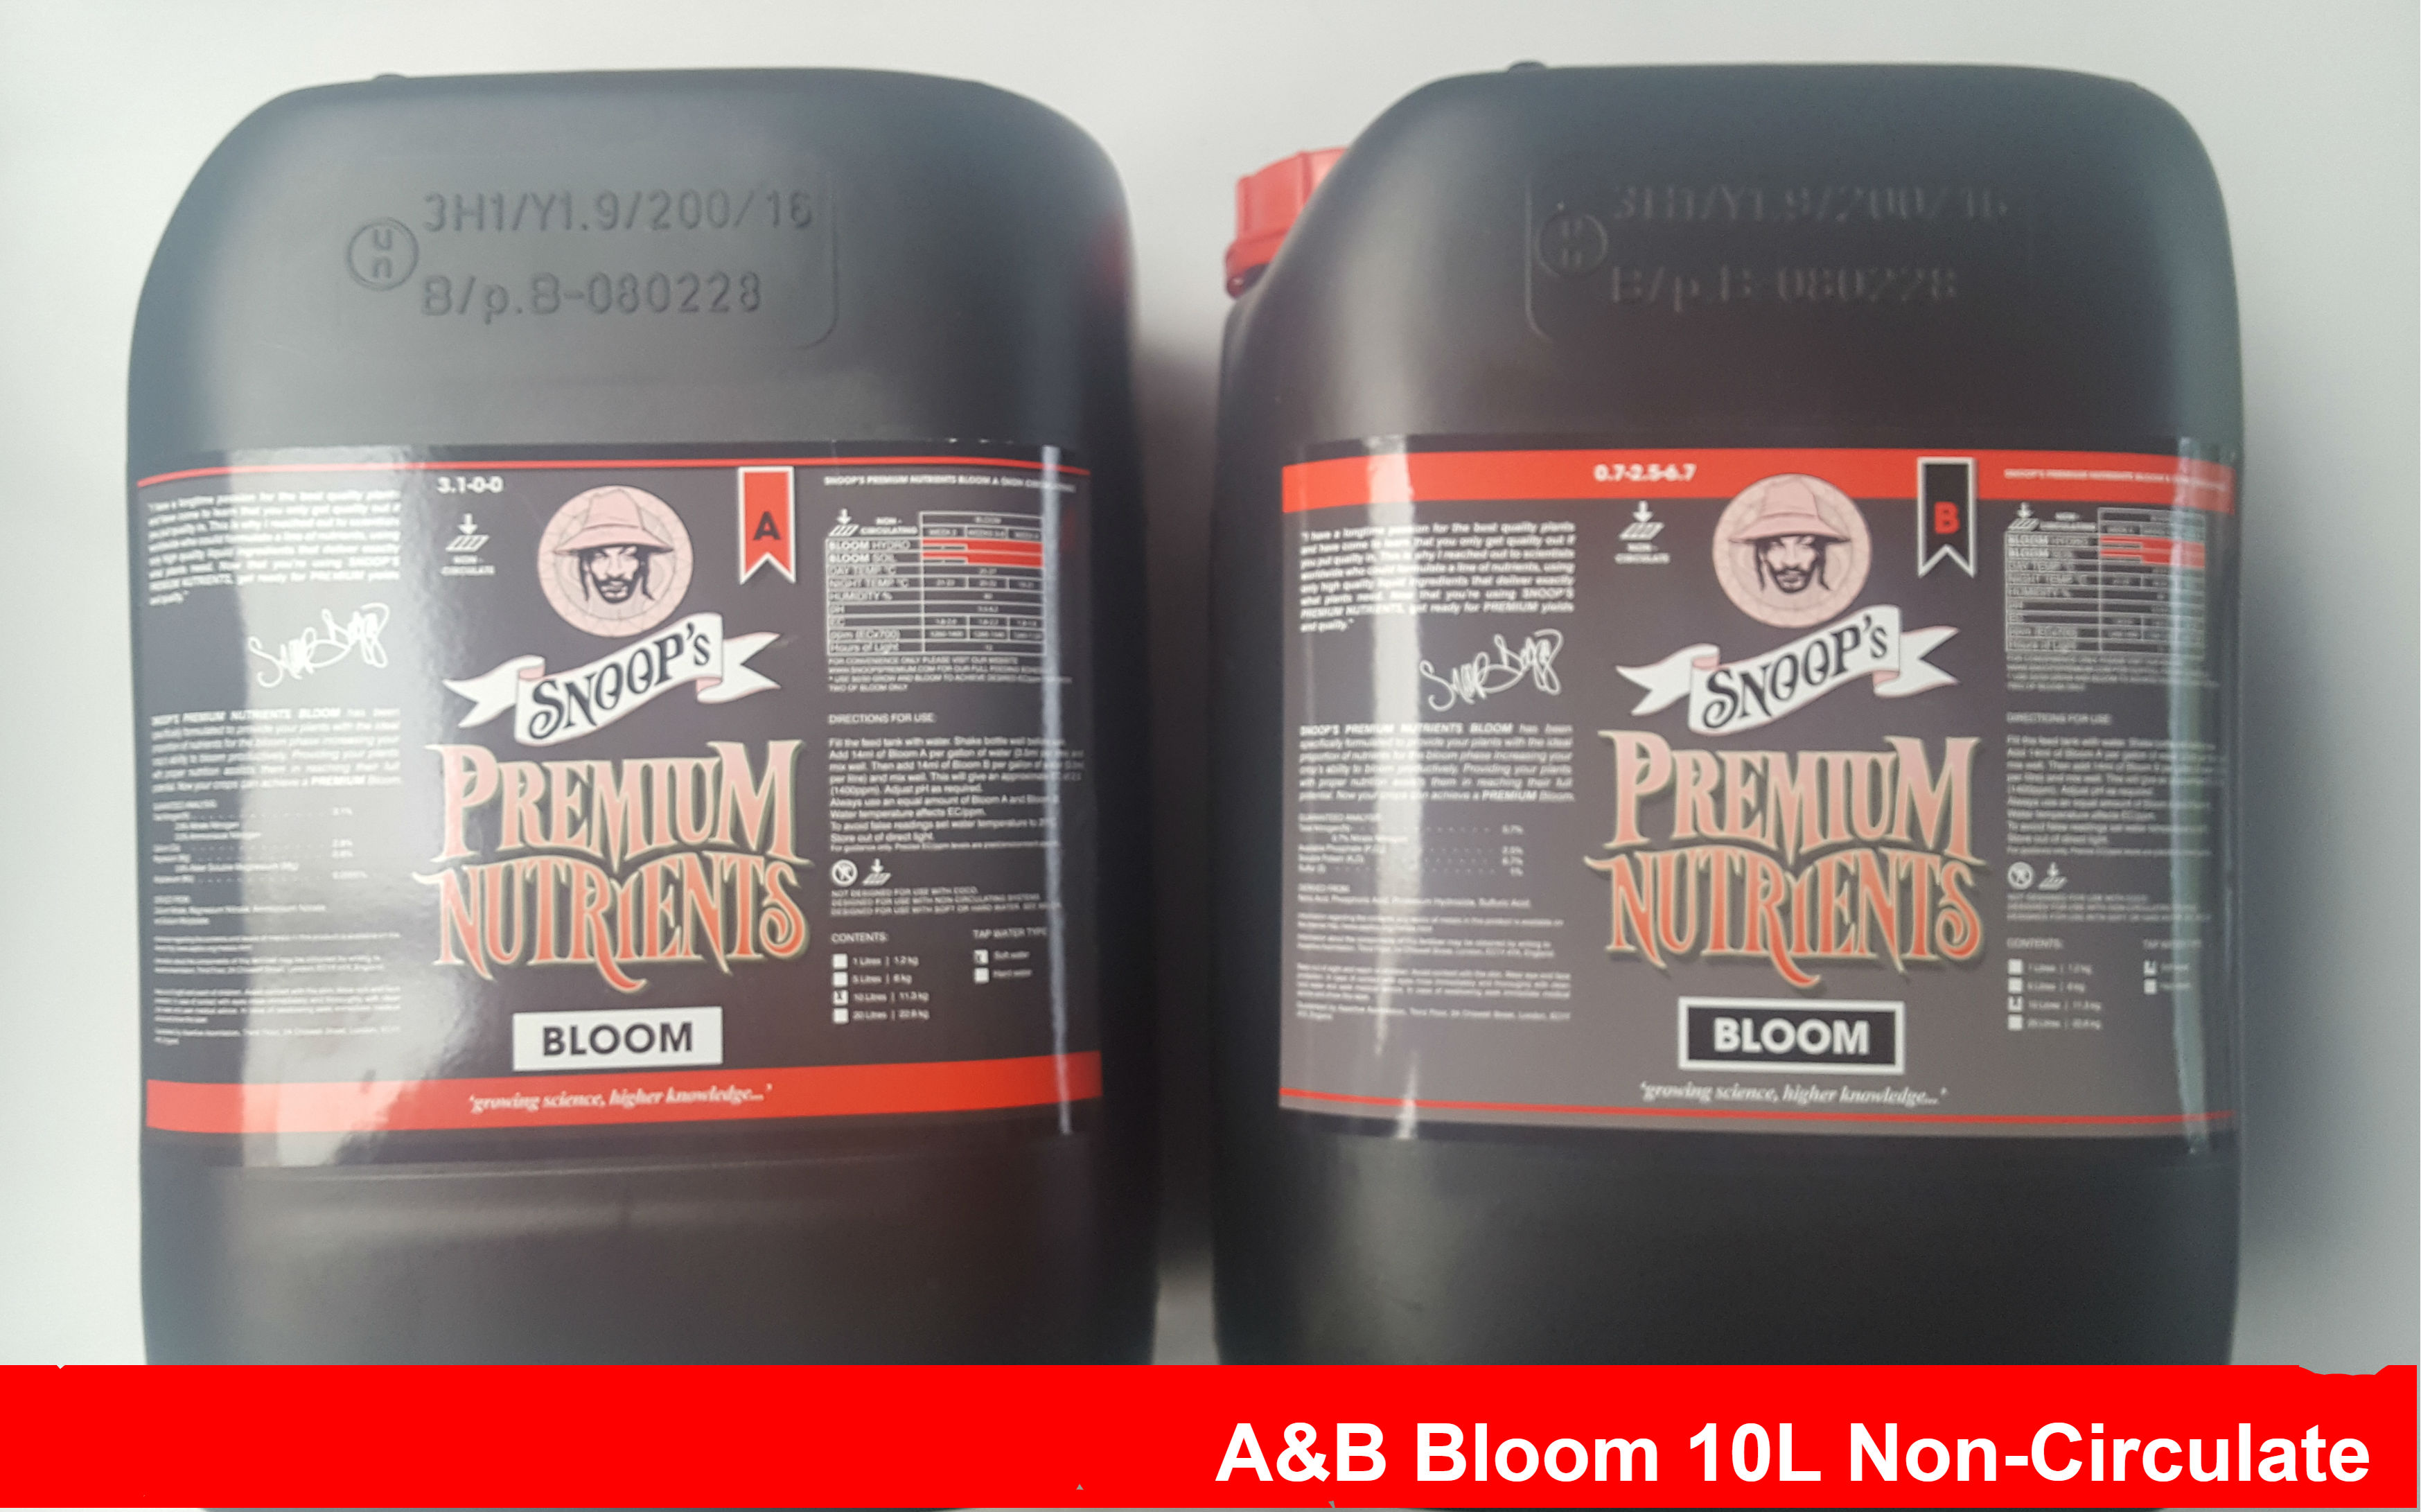 Snoop's A&B Bloom 10L Non-Circulate for Soil